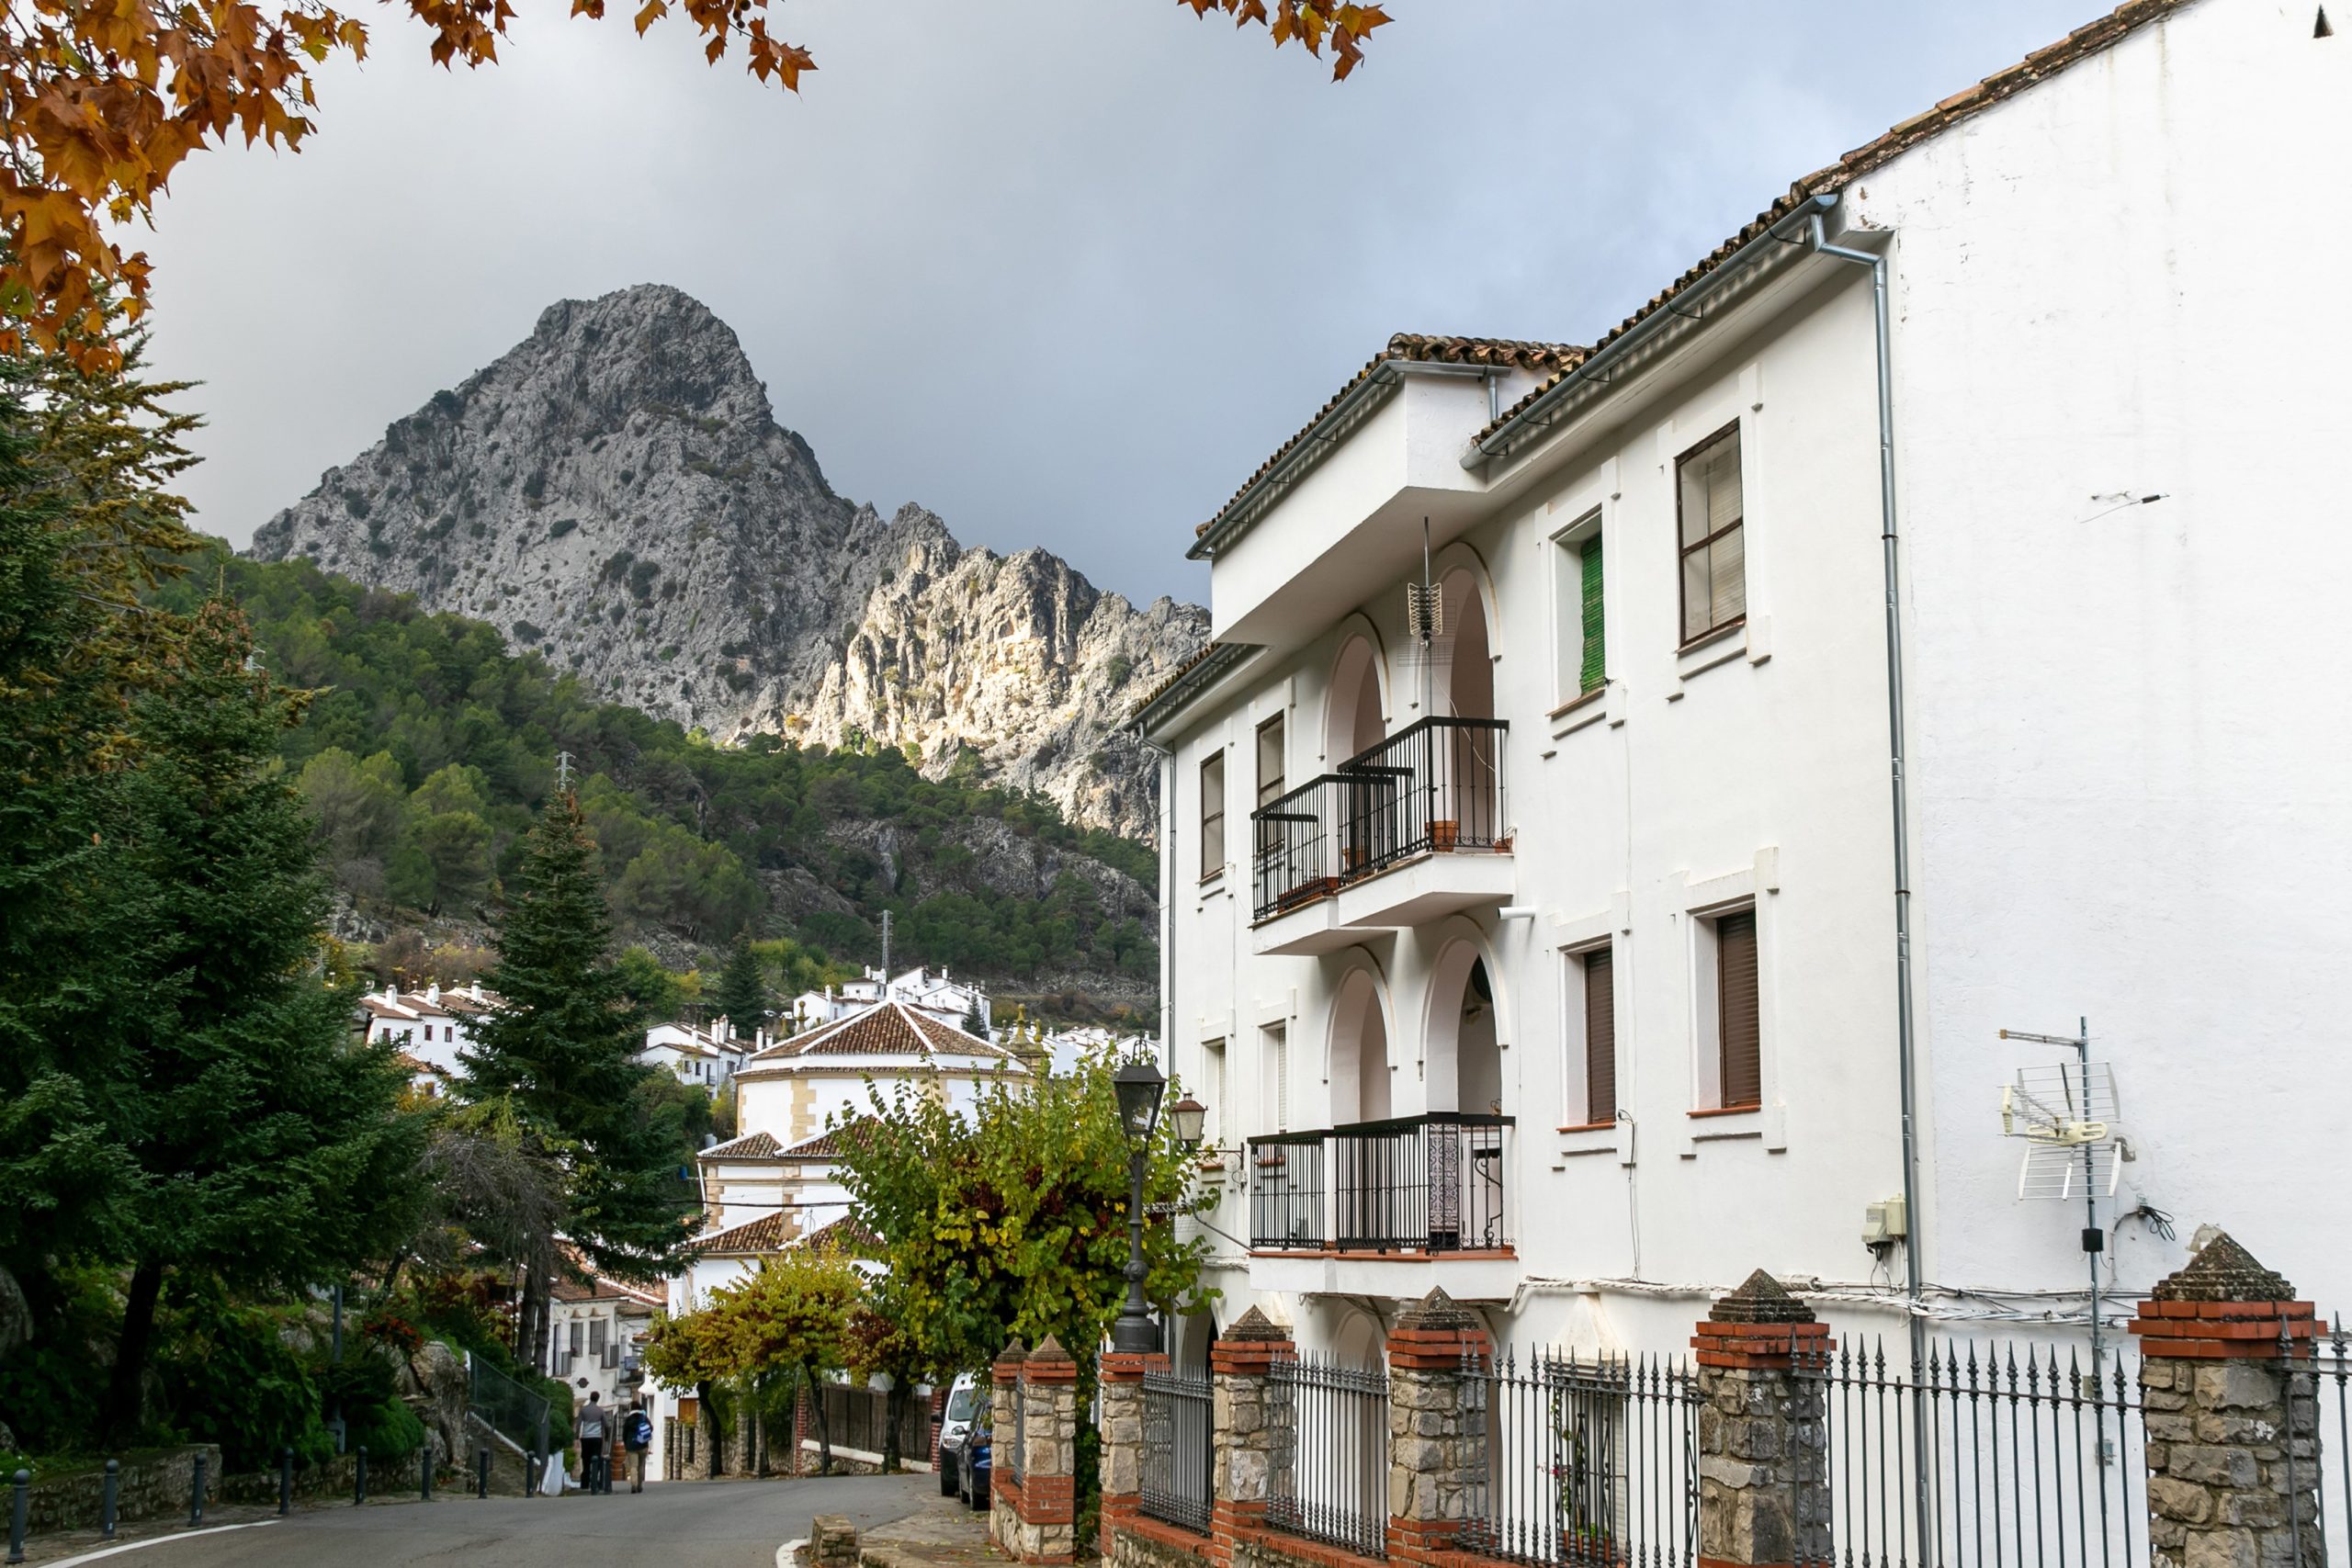 Andalusian culture and mountain atmosphere in the village of Grazalema